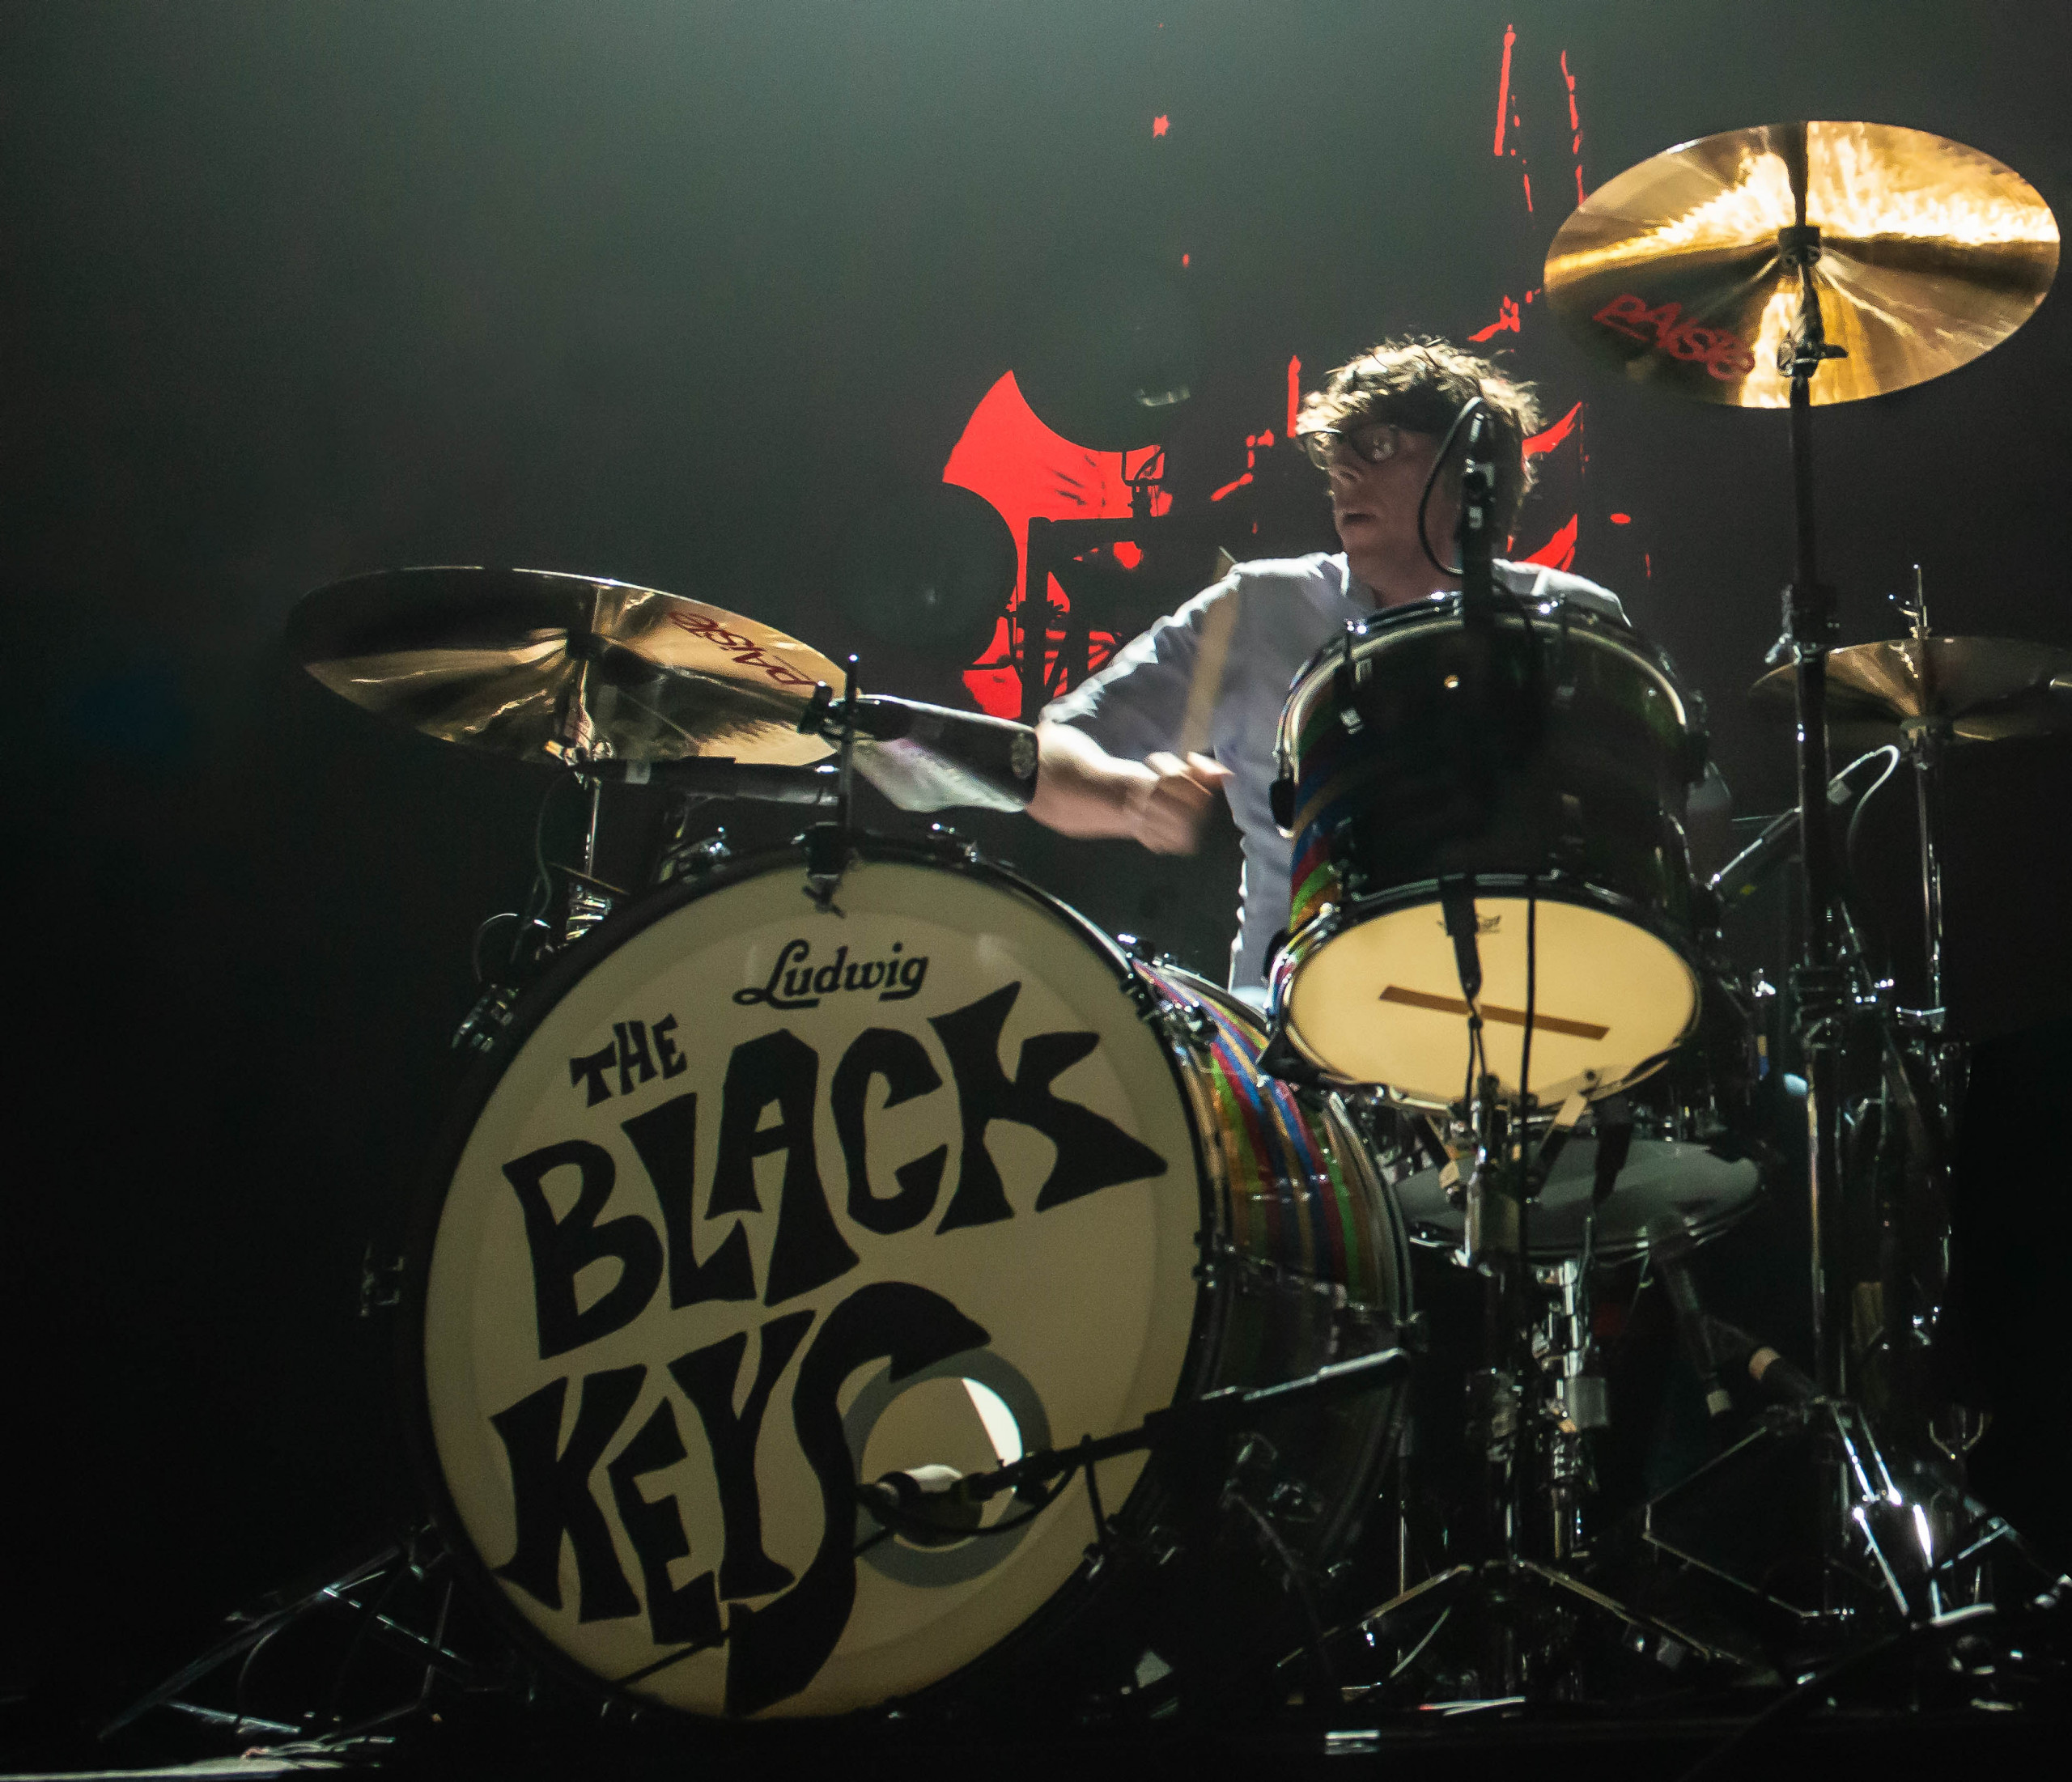 https://www.drummerphotographer.com/wp-content/uploads/2018/11/Patrick-Carney-1-of-1-scaled.jpg